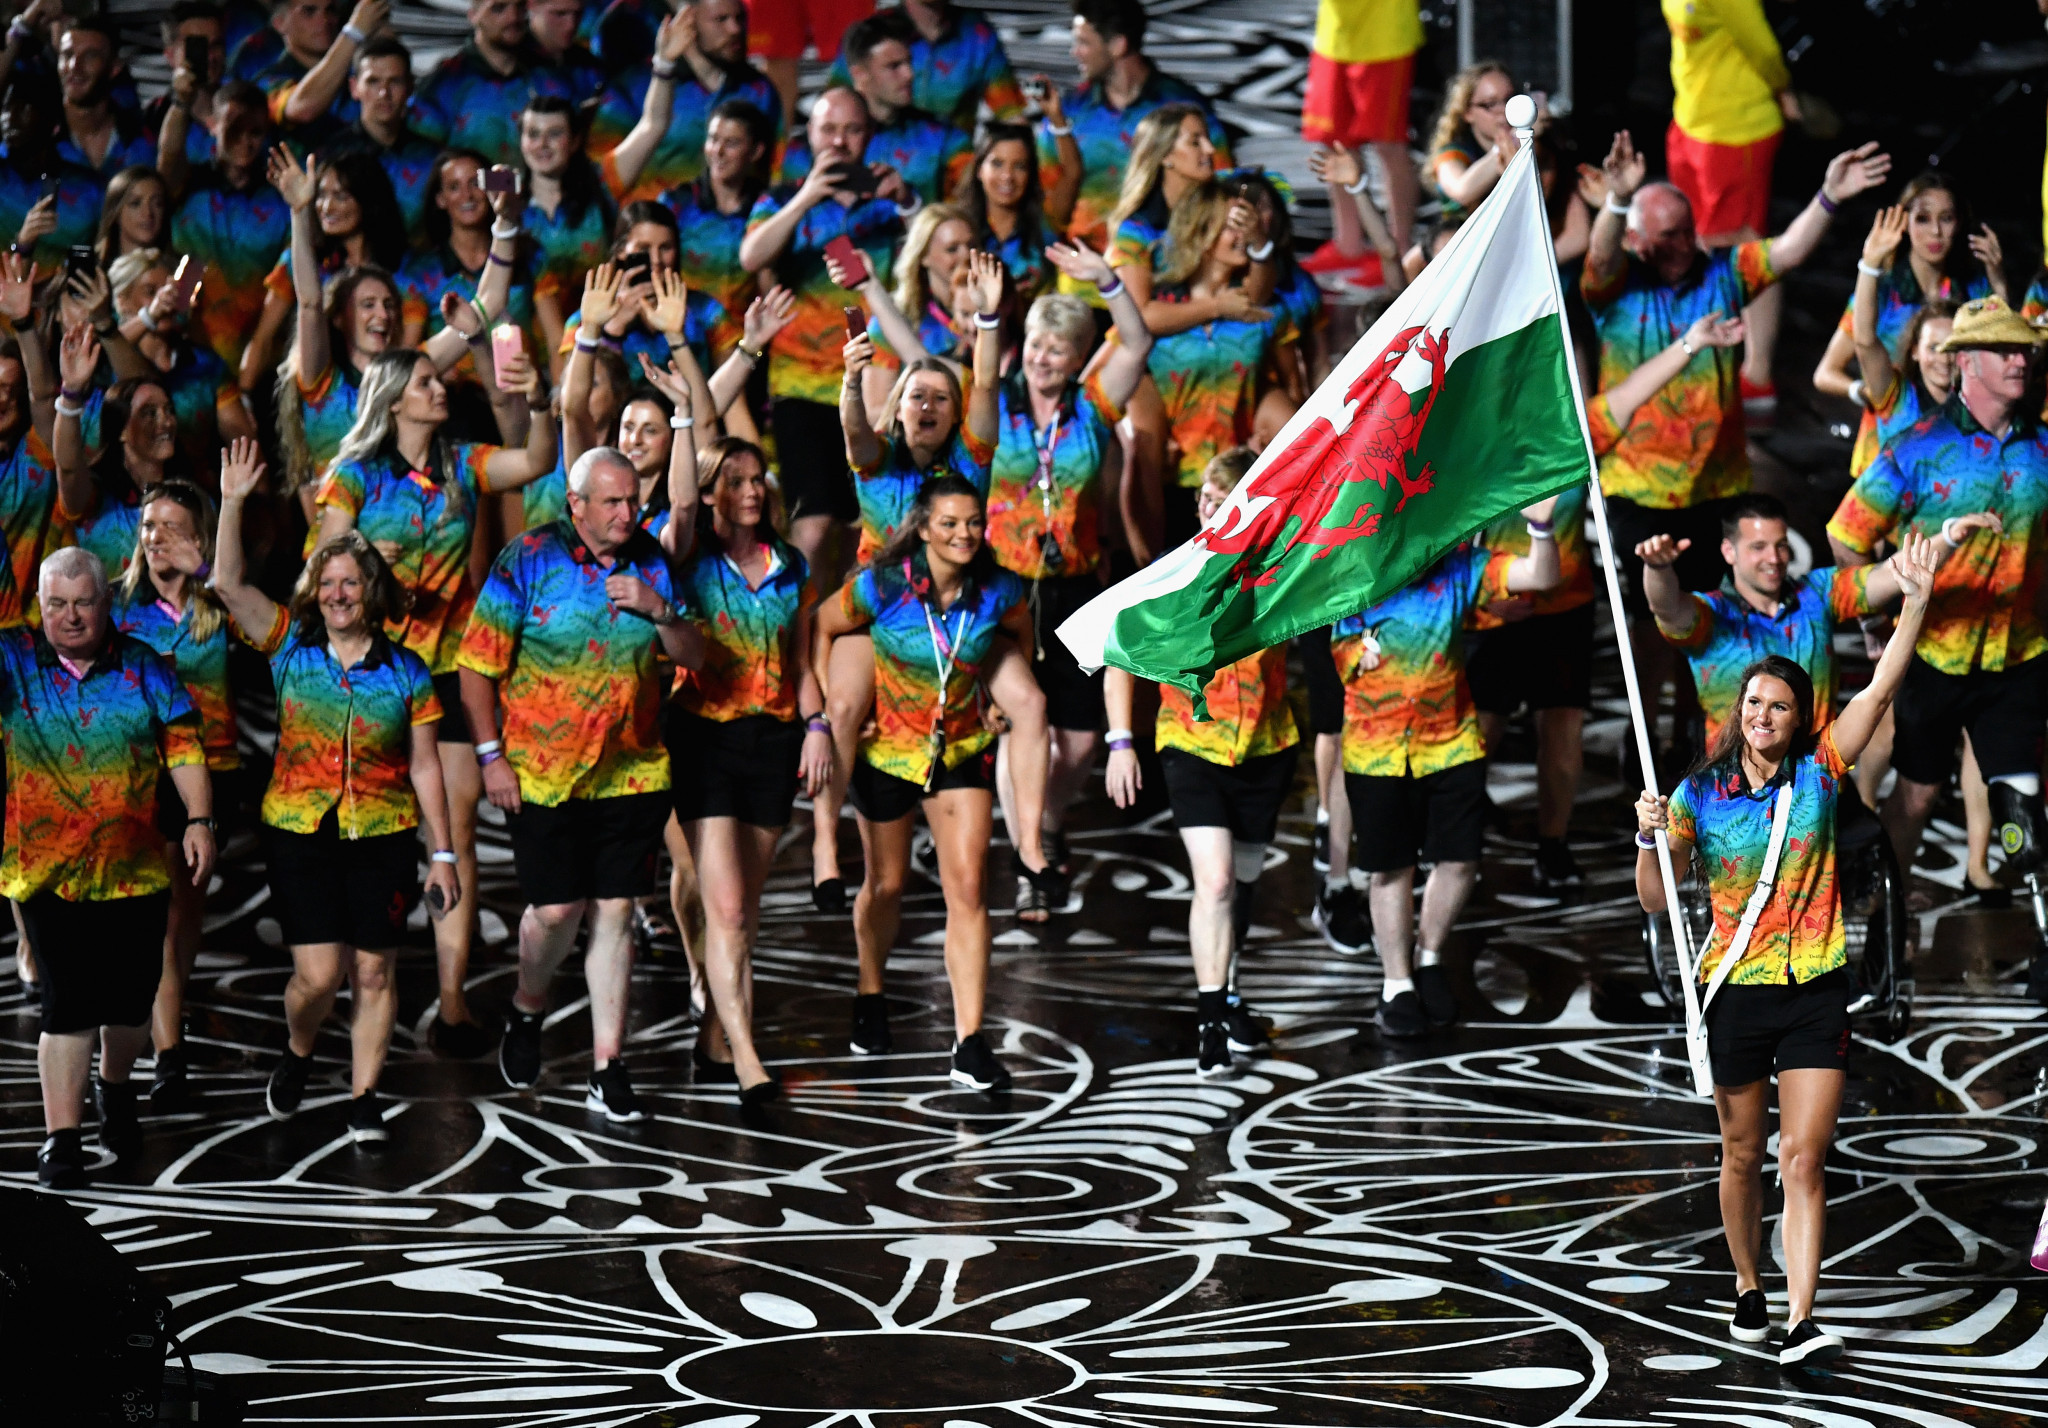 Wales produced a record-breaking team for a second consecutive Commonwealth Games at Gold Coast 2018 ©Getty Images